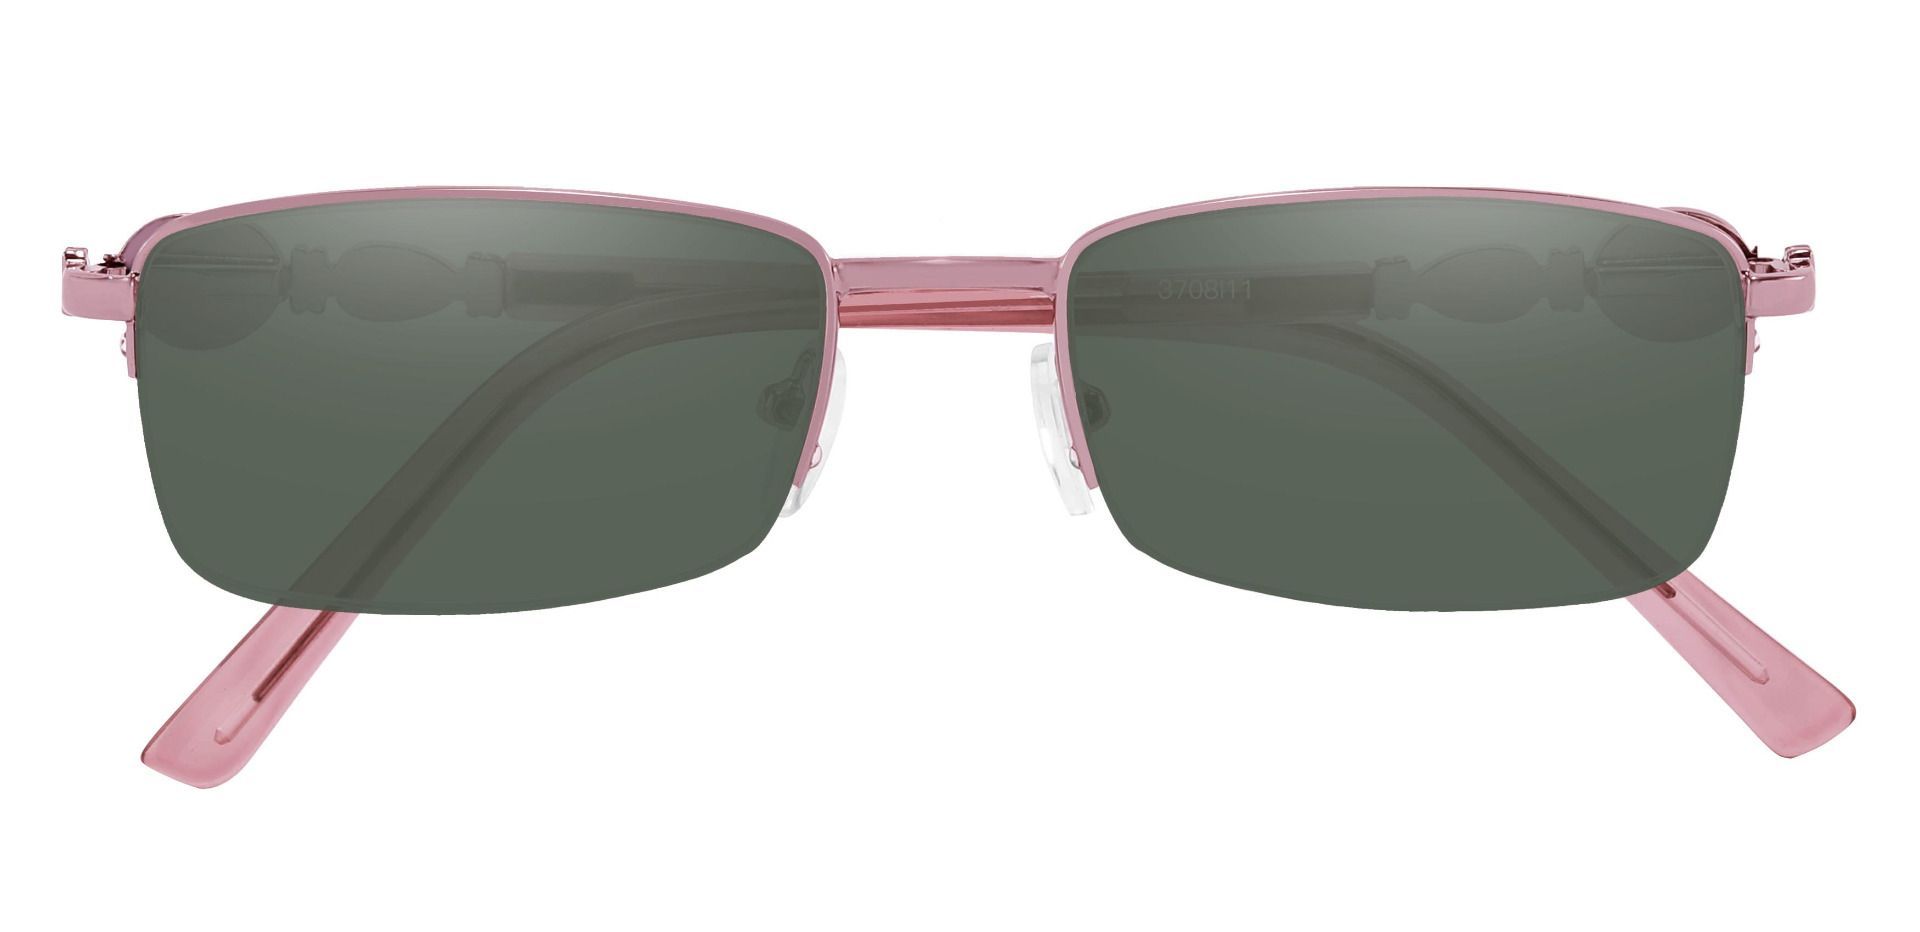 Crowley Rectangle Non-Rx Sunglasses - Pink Frame With Green Lenses